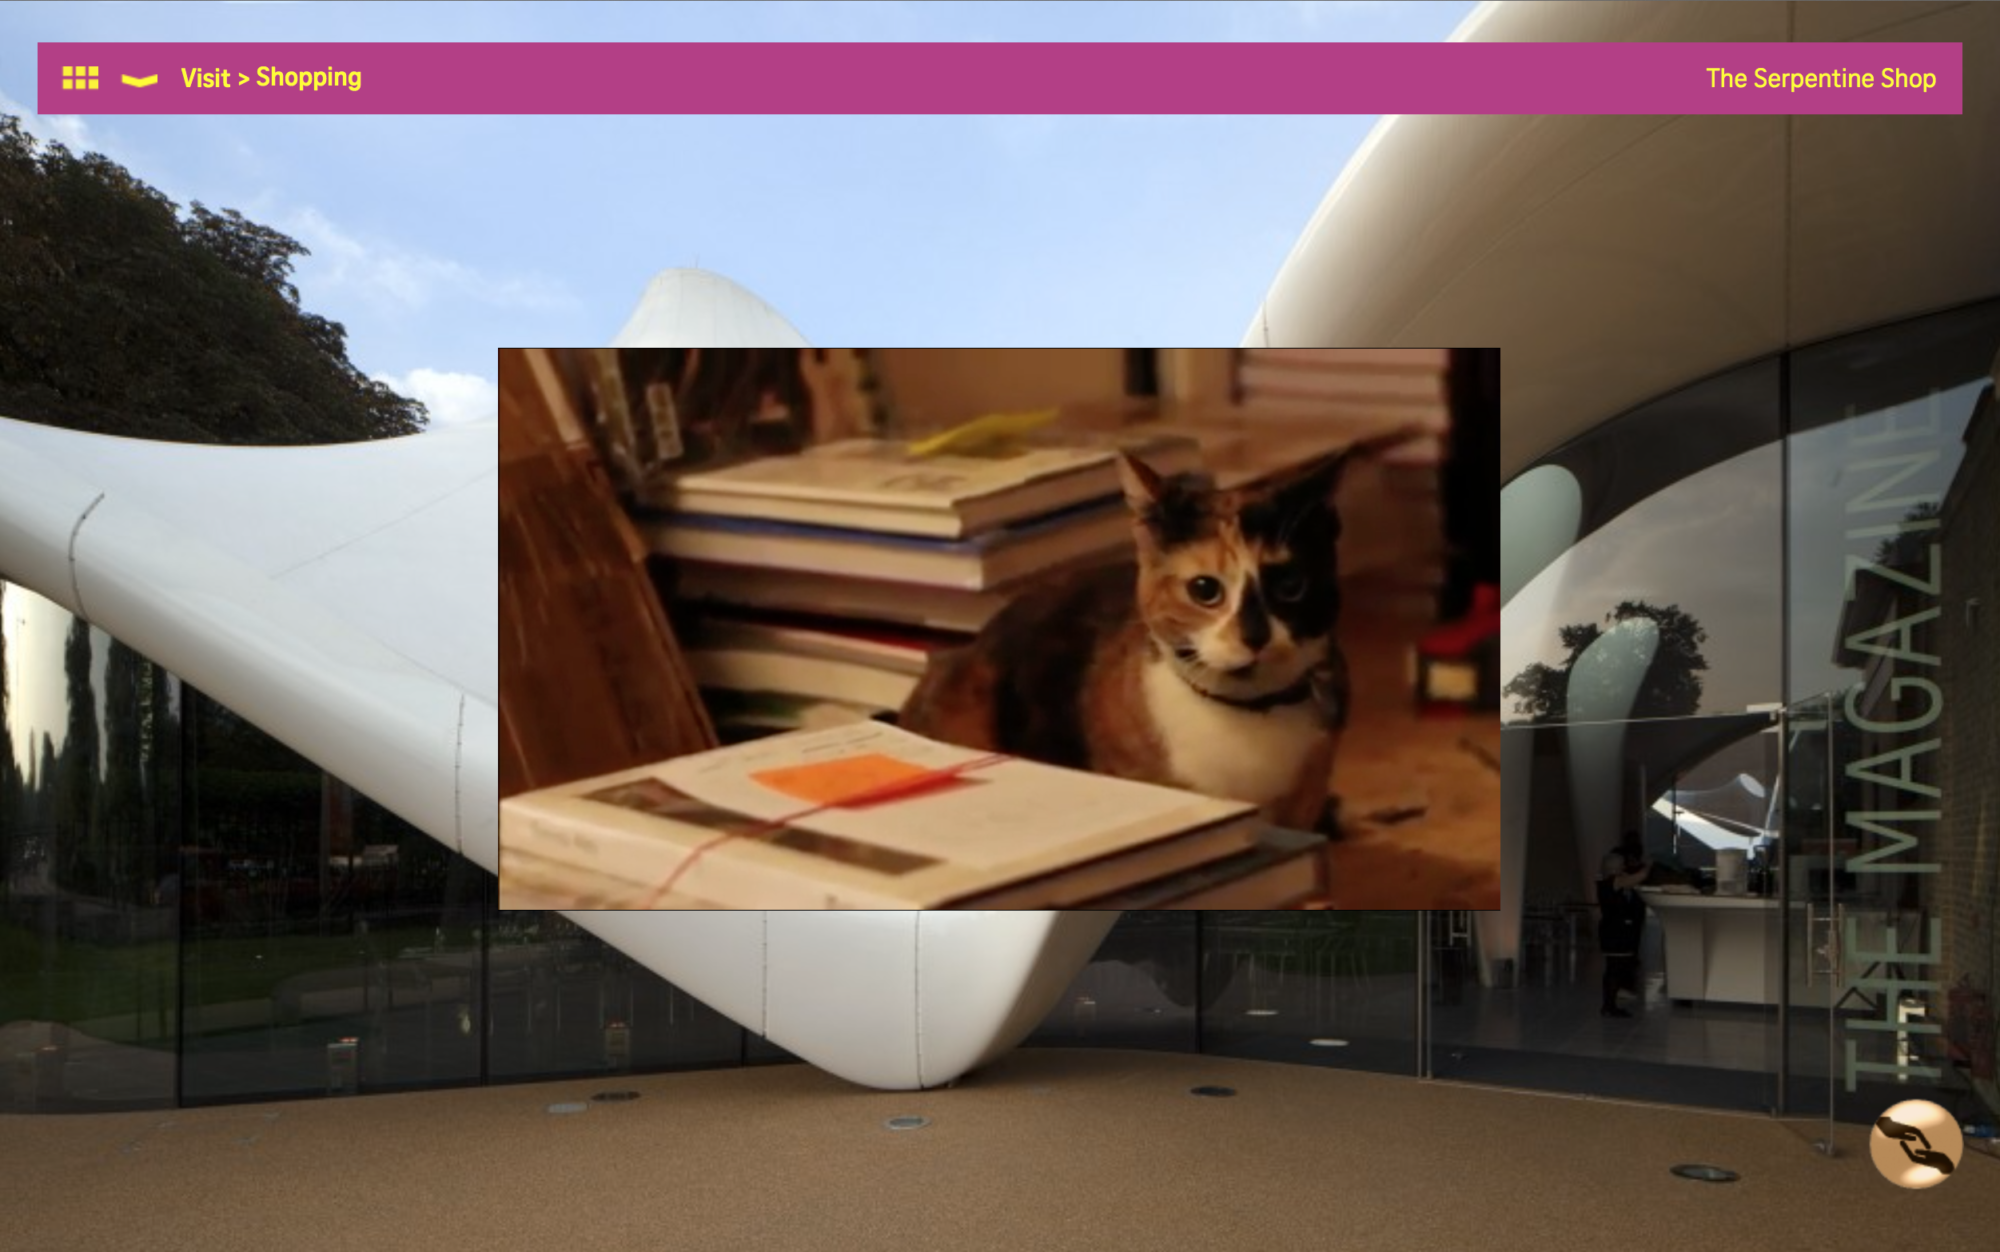 A screenshot image from the Serpentine Gallery website. An image of a cat sitting near books overlays an image of the The Serpentine Shop.